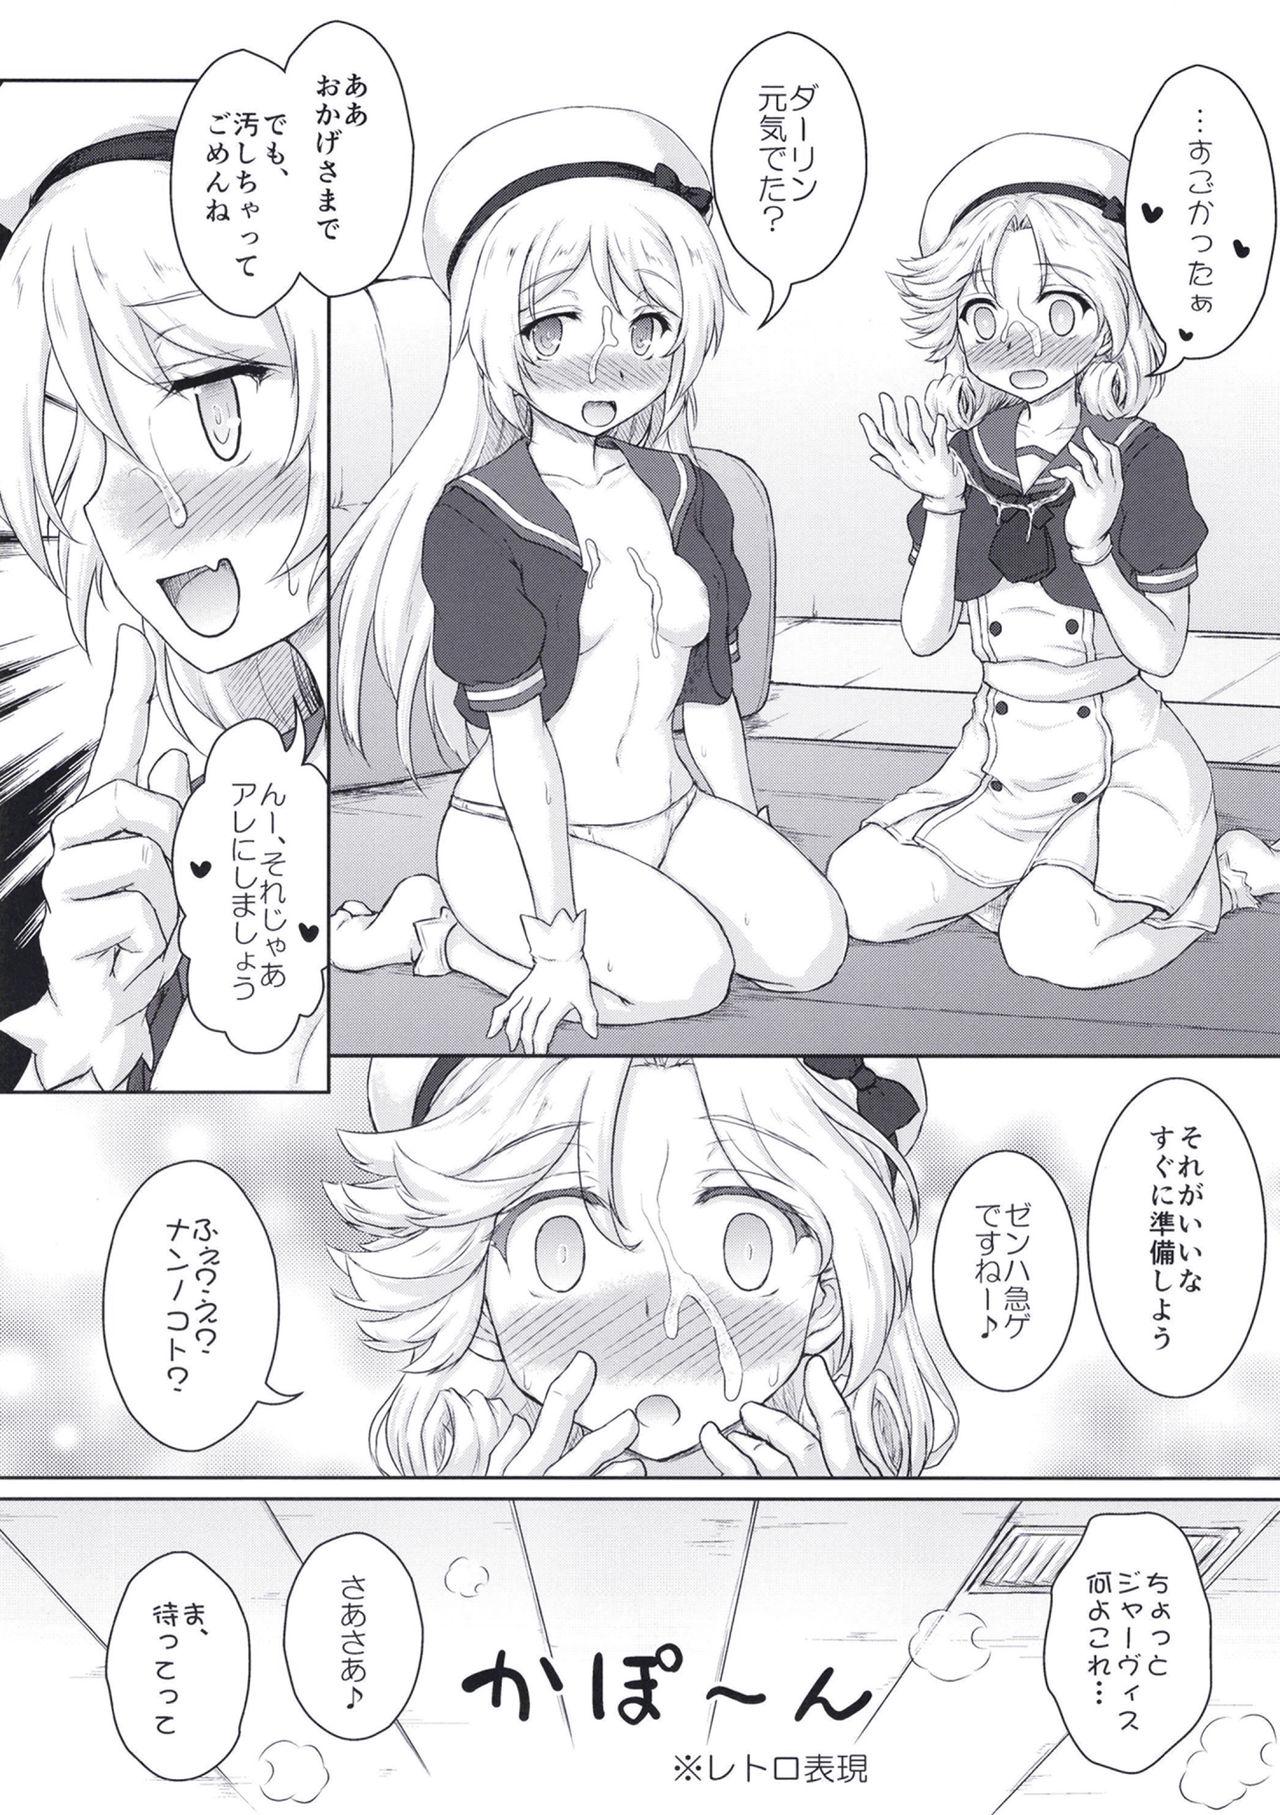 Webcamchat Darling is in sight! act2 - Kantai collection Upskirt - Page 11